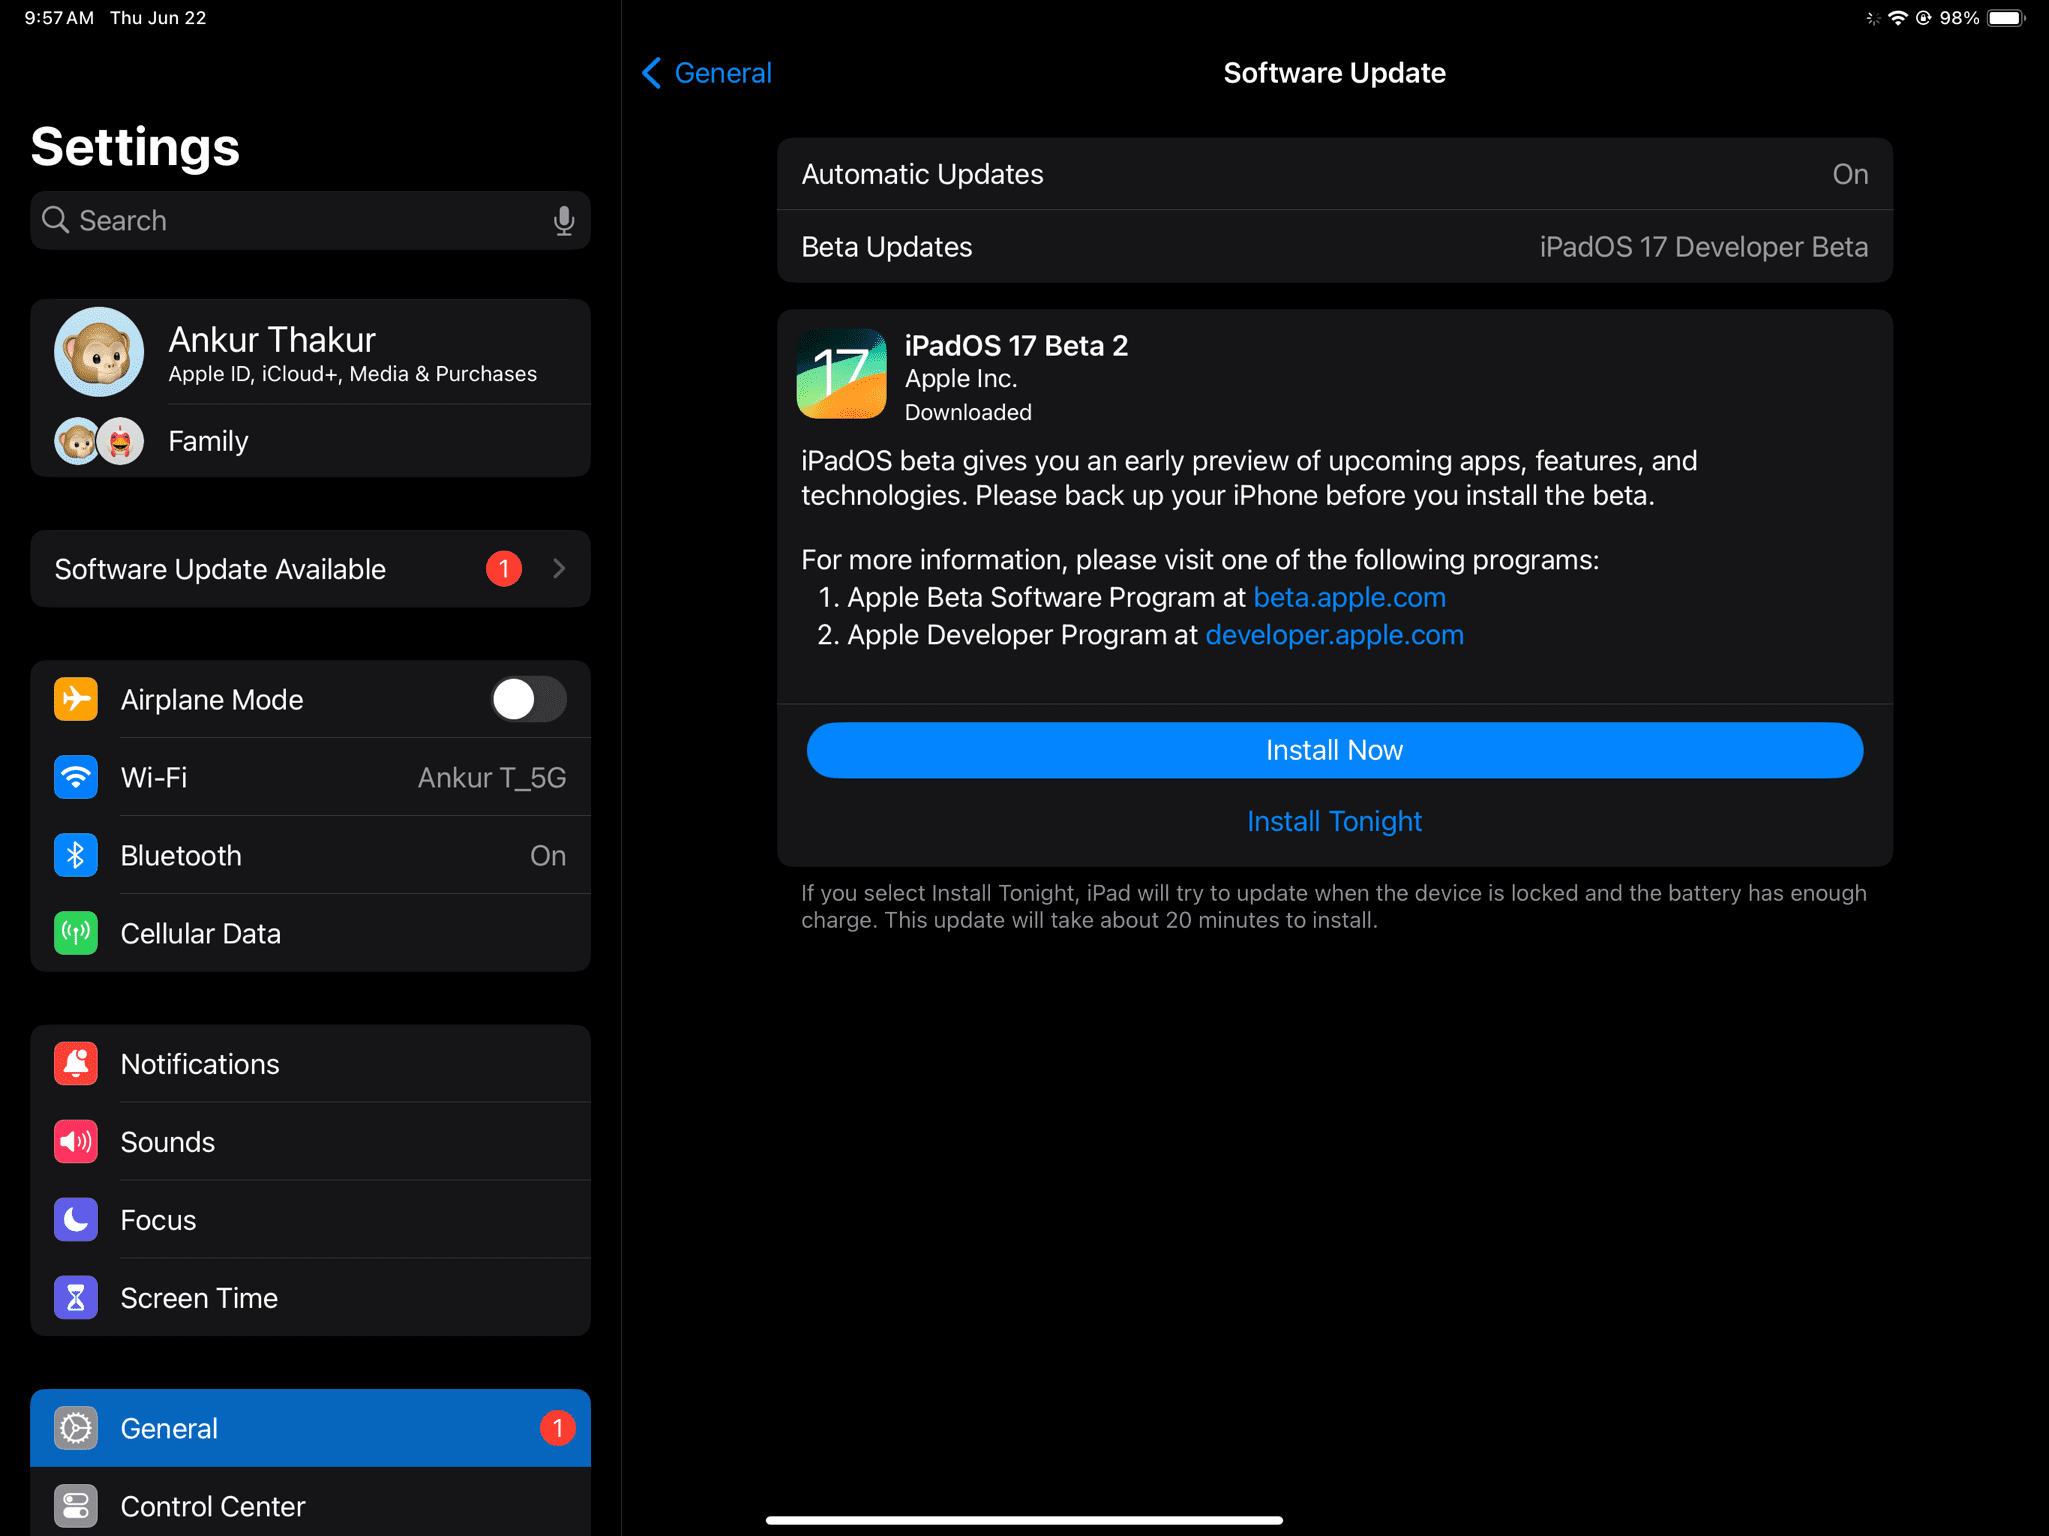 Install Now or Install Tonight buttons on iPad